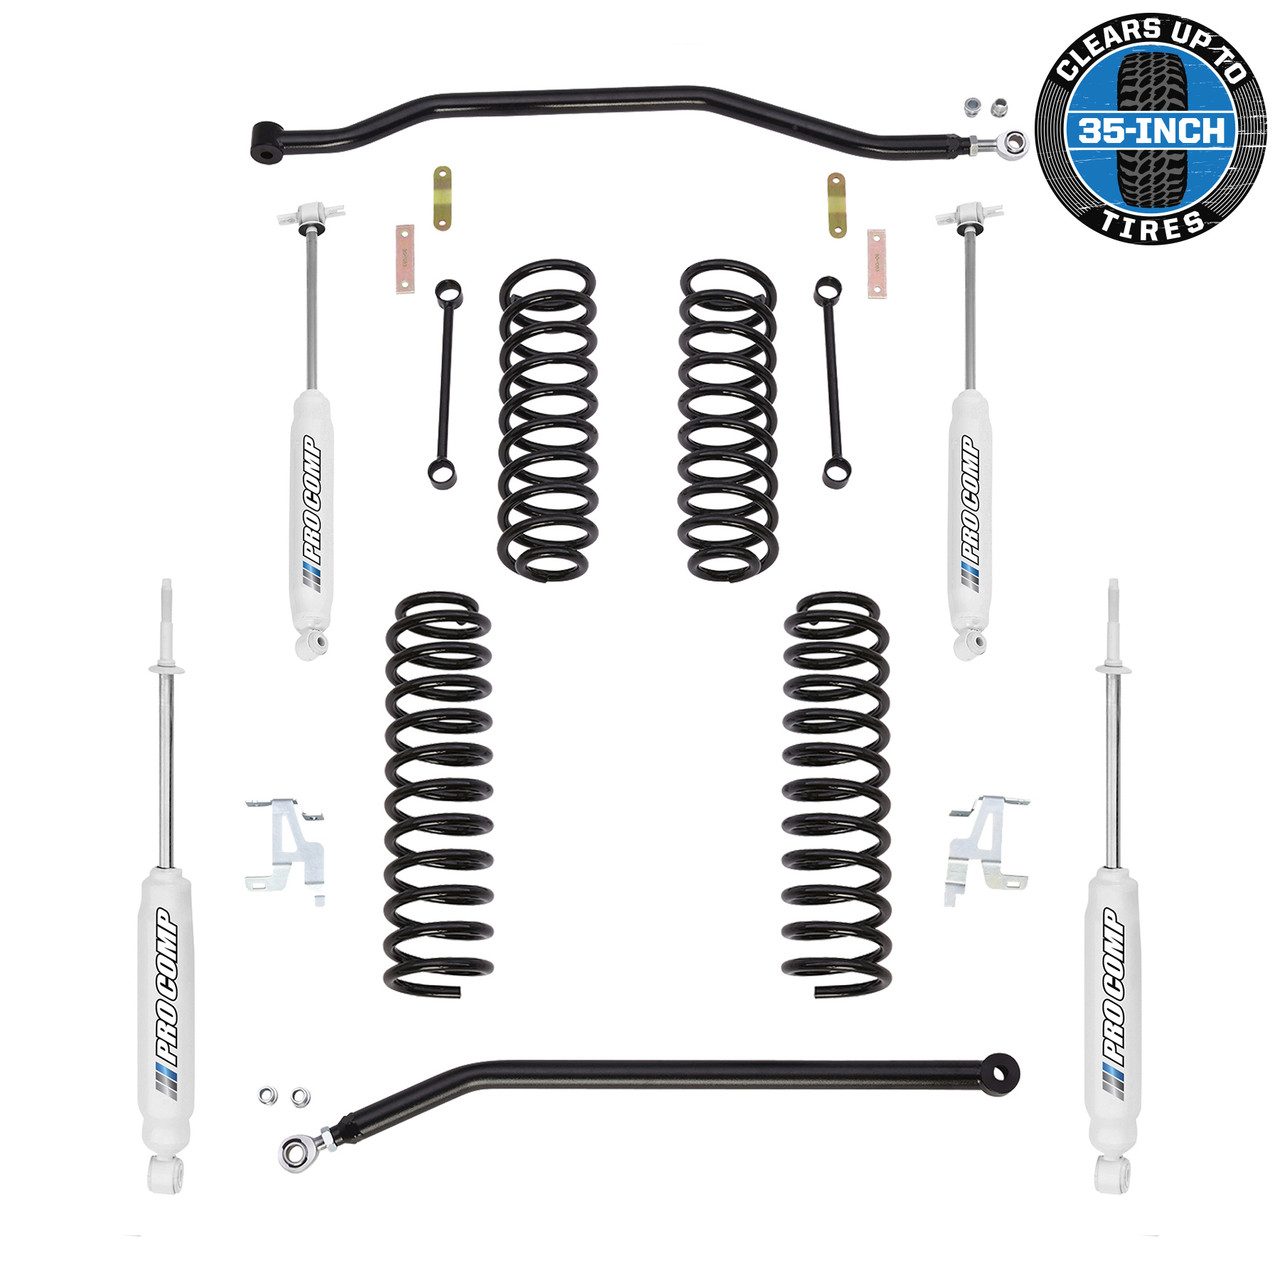 Pro Comp ES9000 2 Front Shocks Kit for Chevy Silverado 1988-1998 2WD 3 inch Lift Ride replacement Shock absorbers 